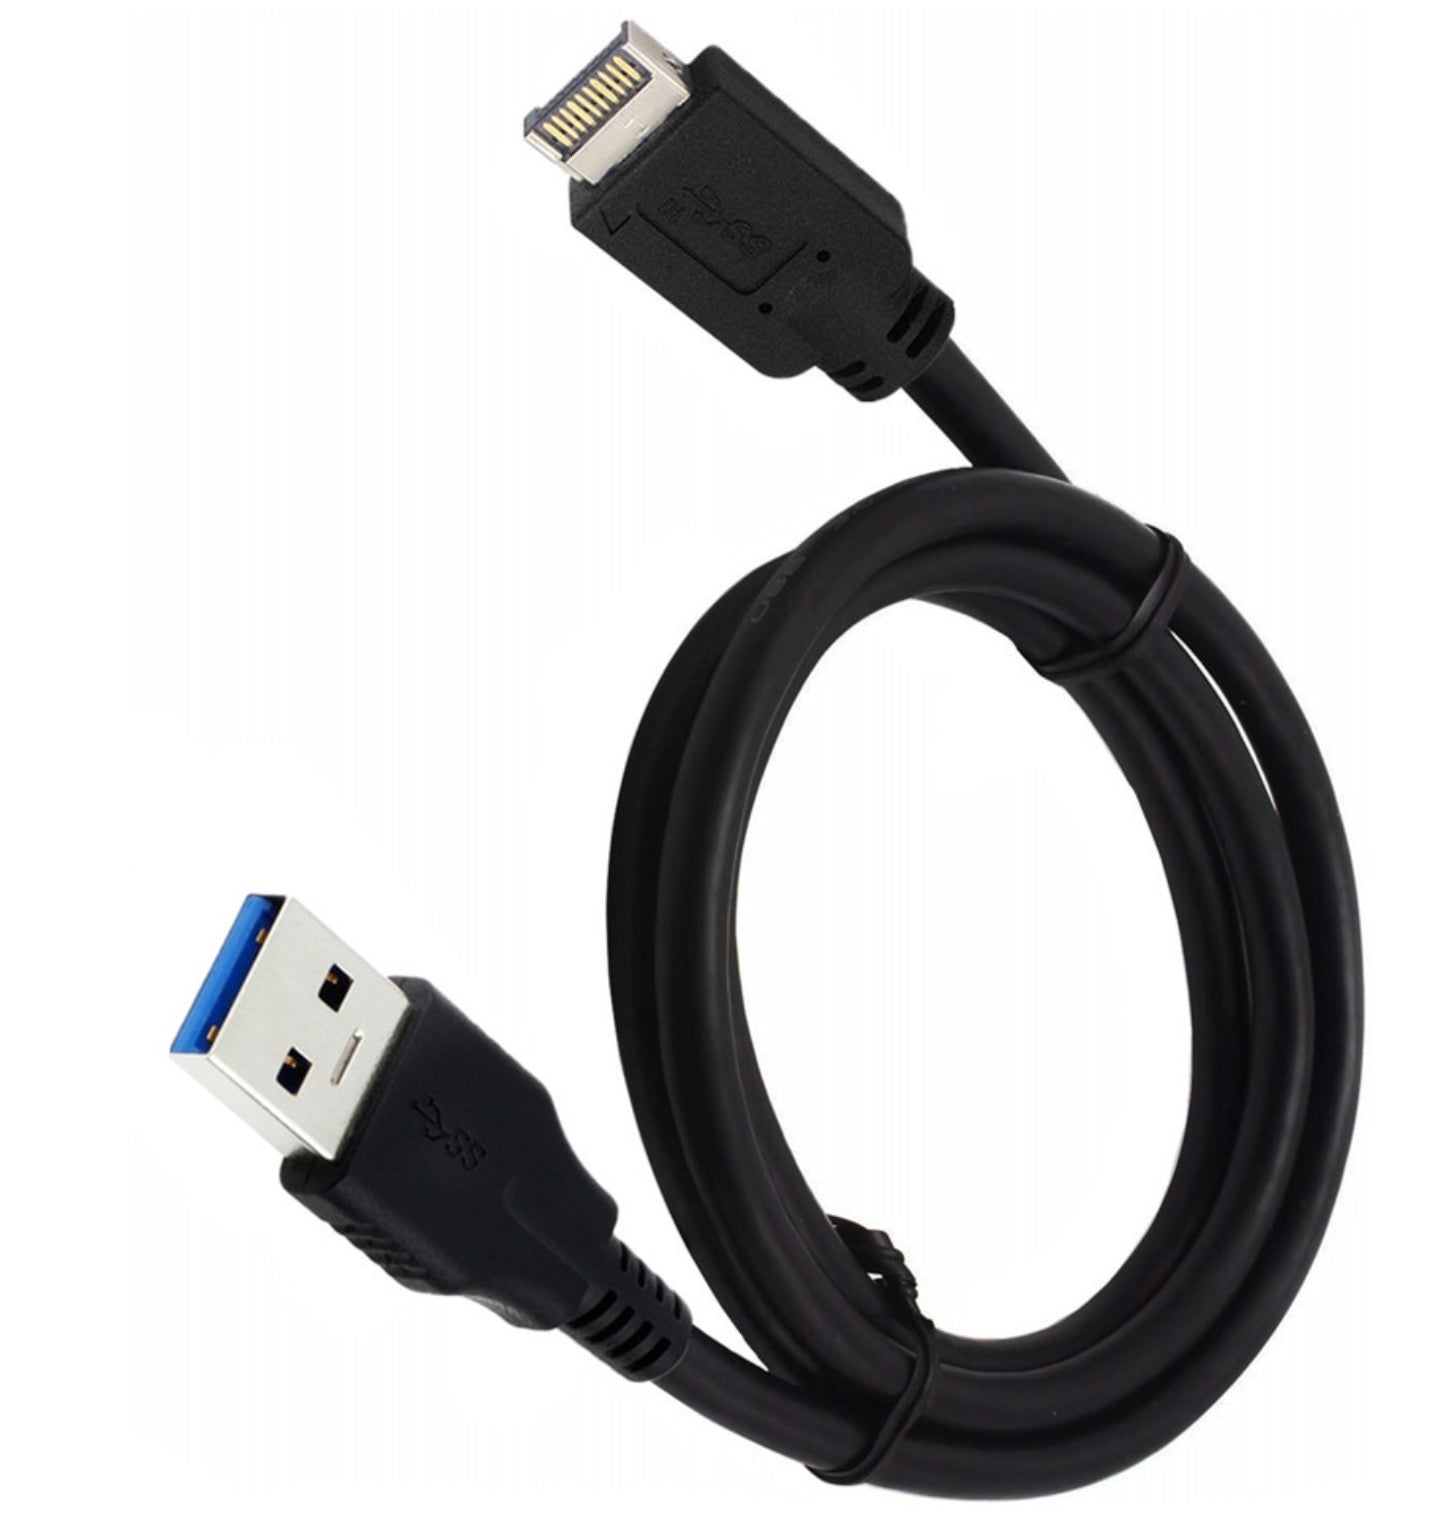 USB 3.1 Type E 24-pin Front Panel Header to USB 3.0 Type-A Male Extension Cable 0.5m